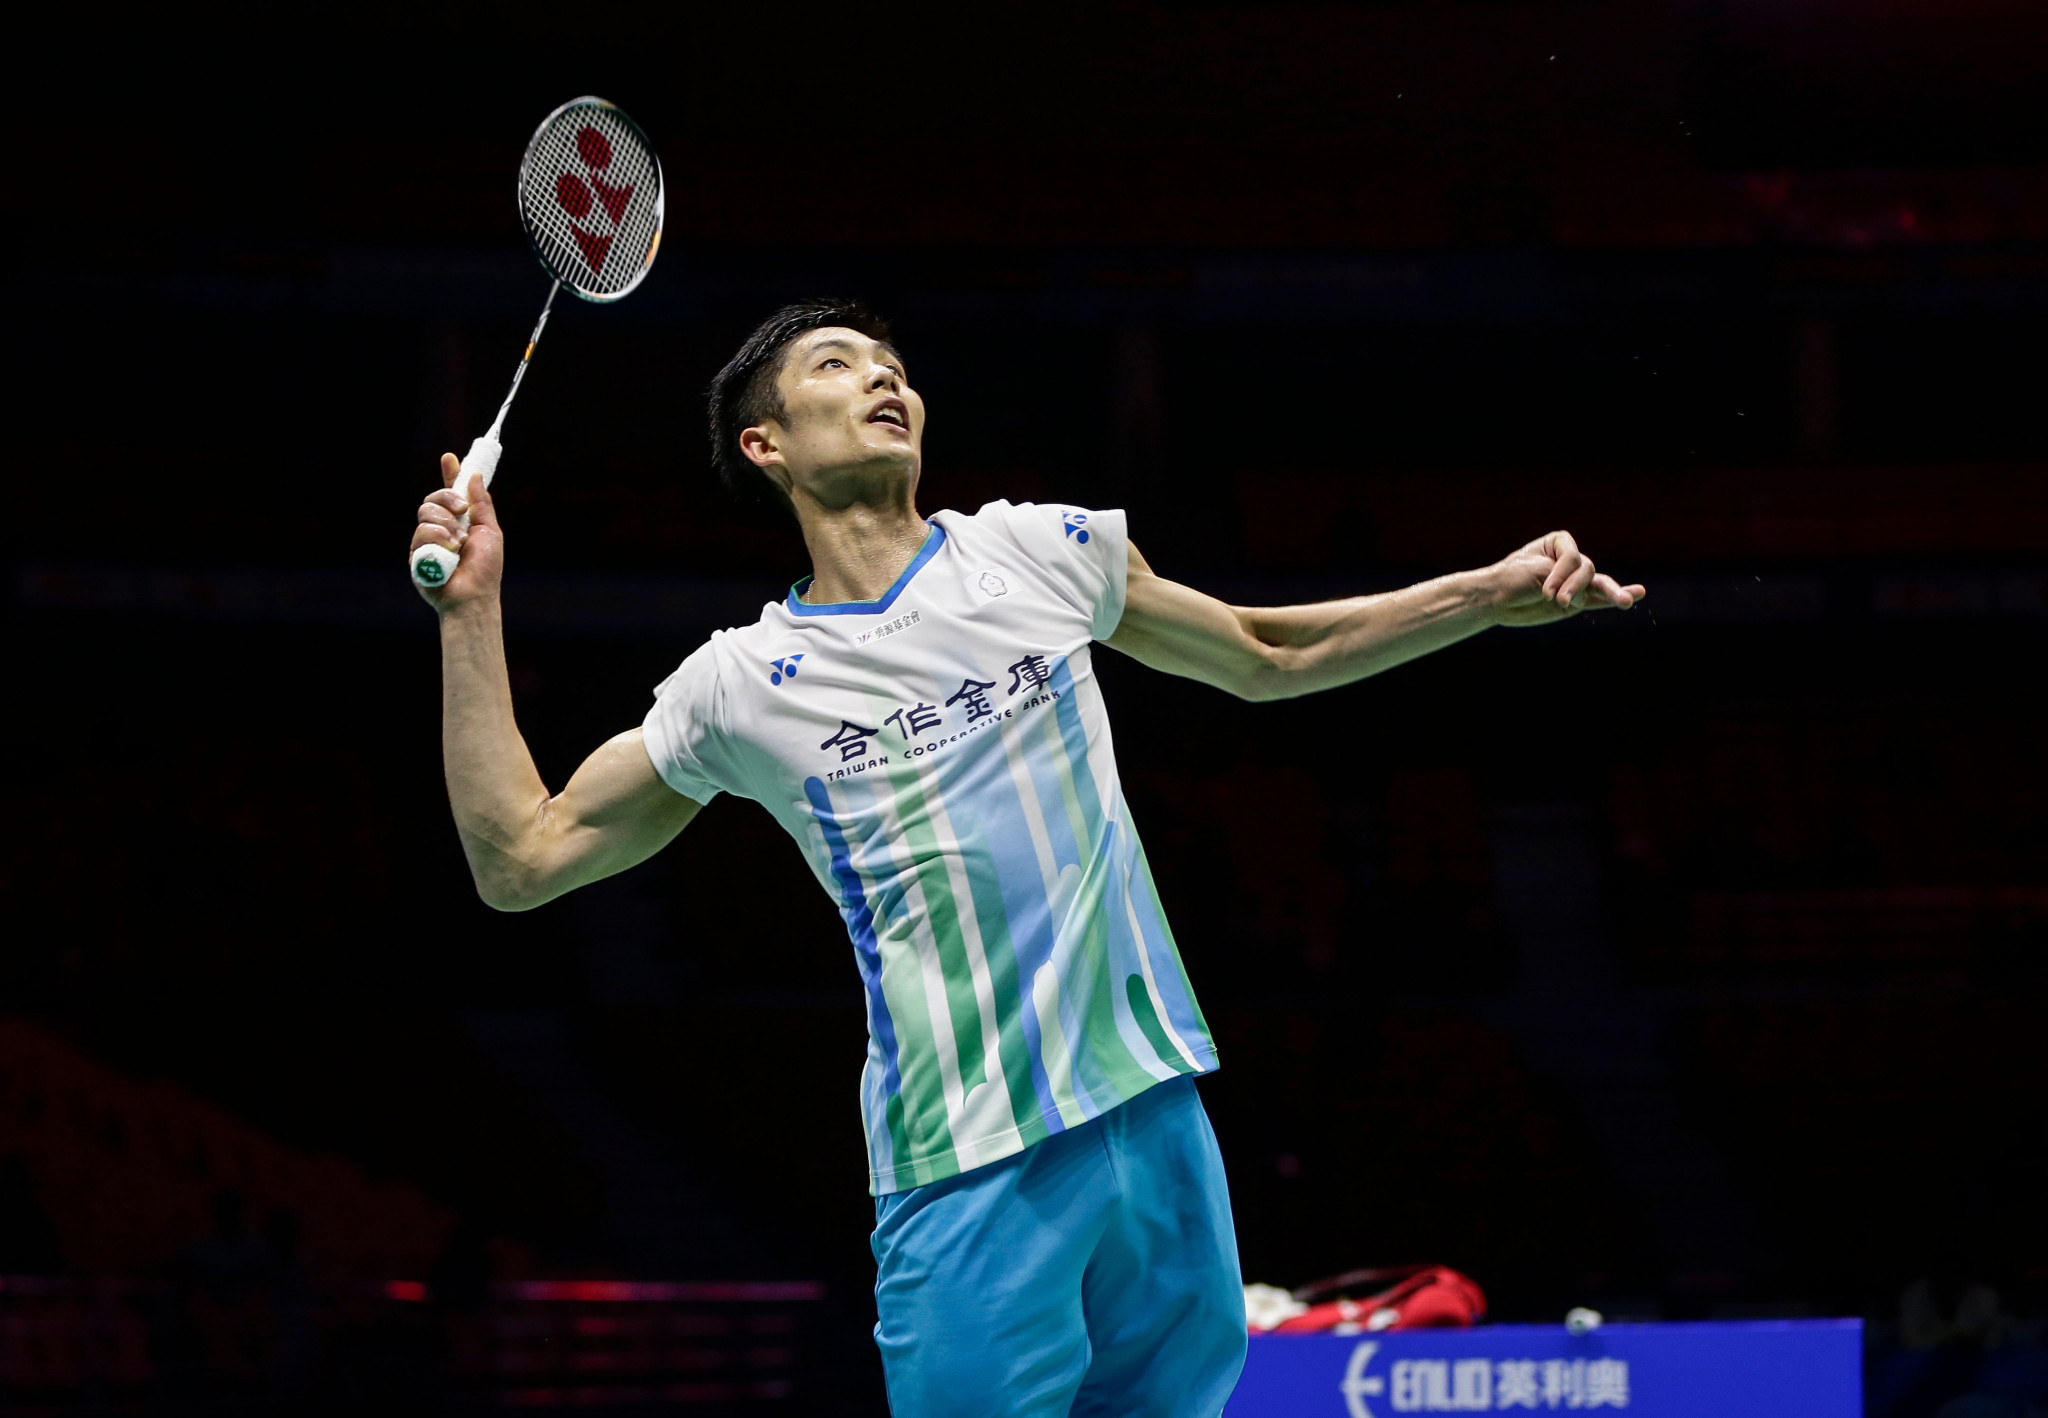 Top seed Chou Tien-chen moved a step closer to winning the men’s singles title at the BWF Australian Open after coming through his quarter-final tie in Sydney today ©Getty Images